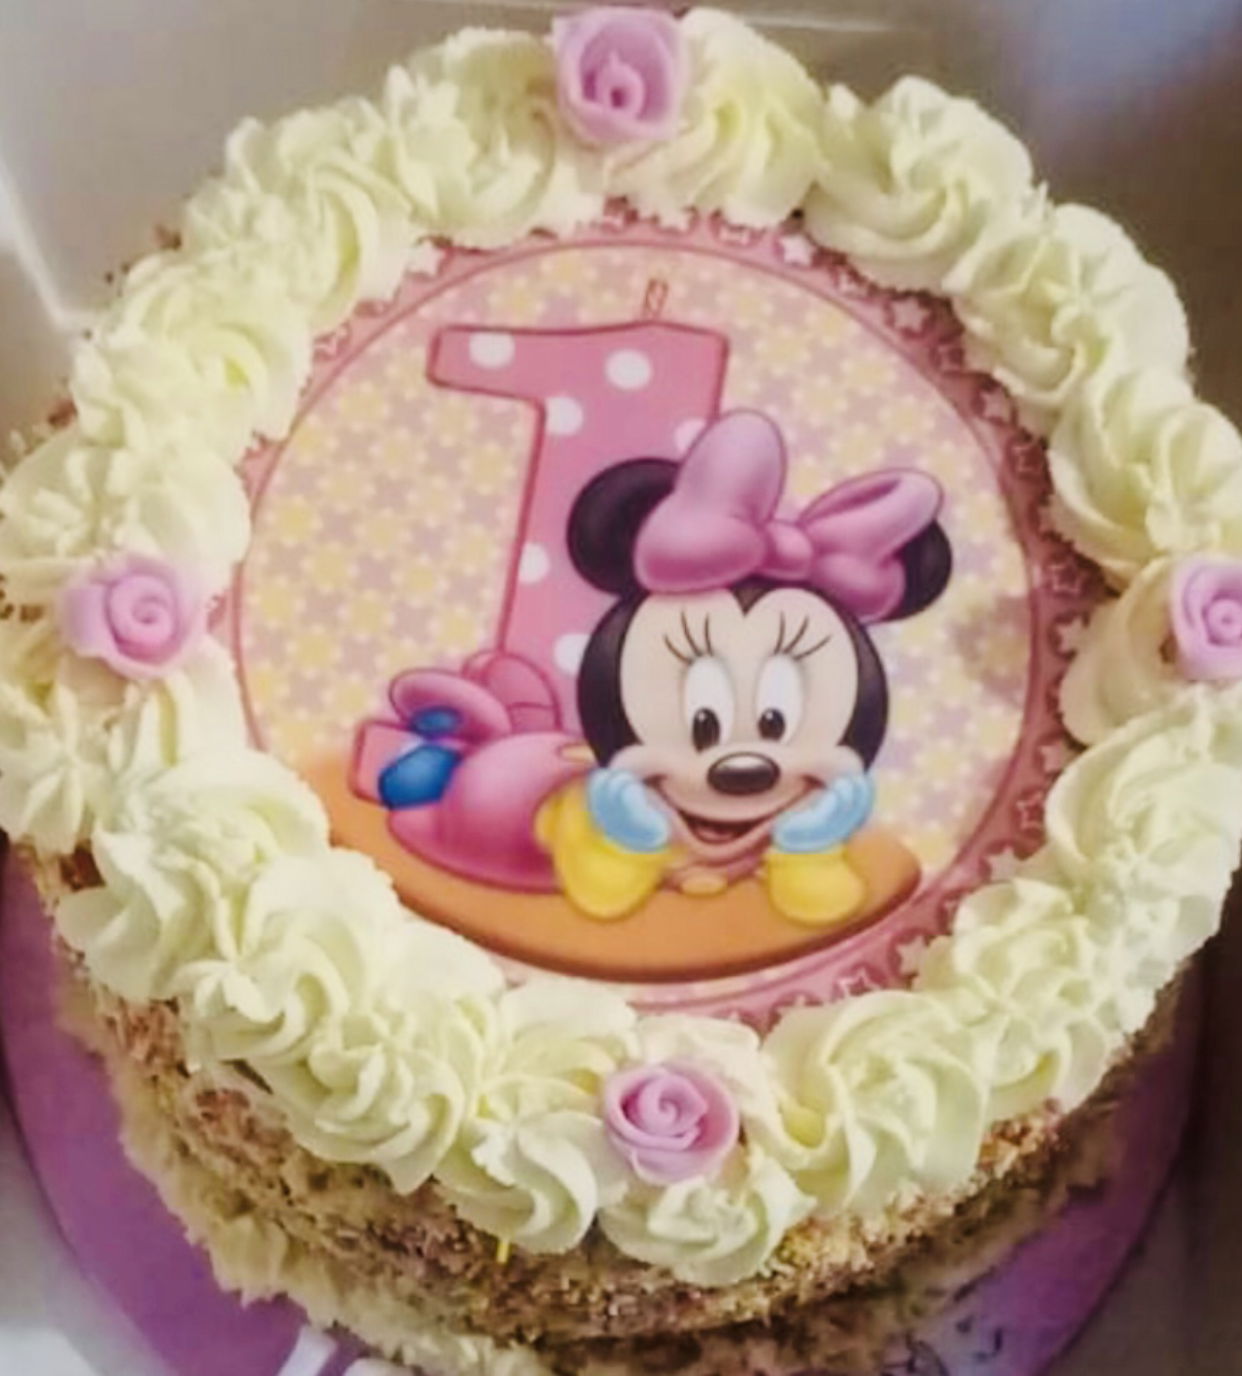 2 Layer Vanilla Minnie Mouse Birthday Cake With Buttercream Frosting and Edible Image